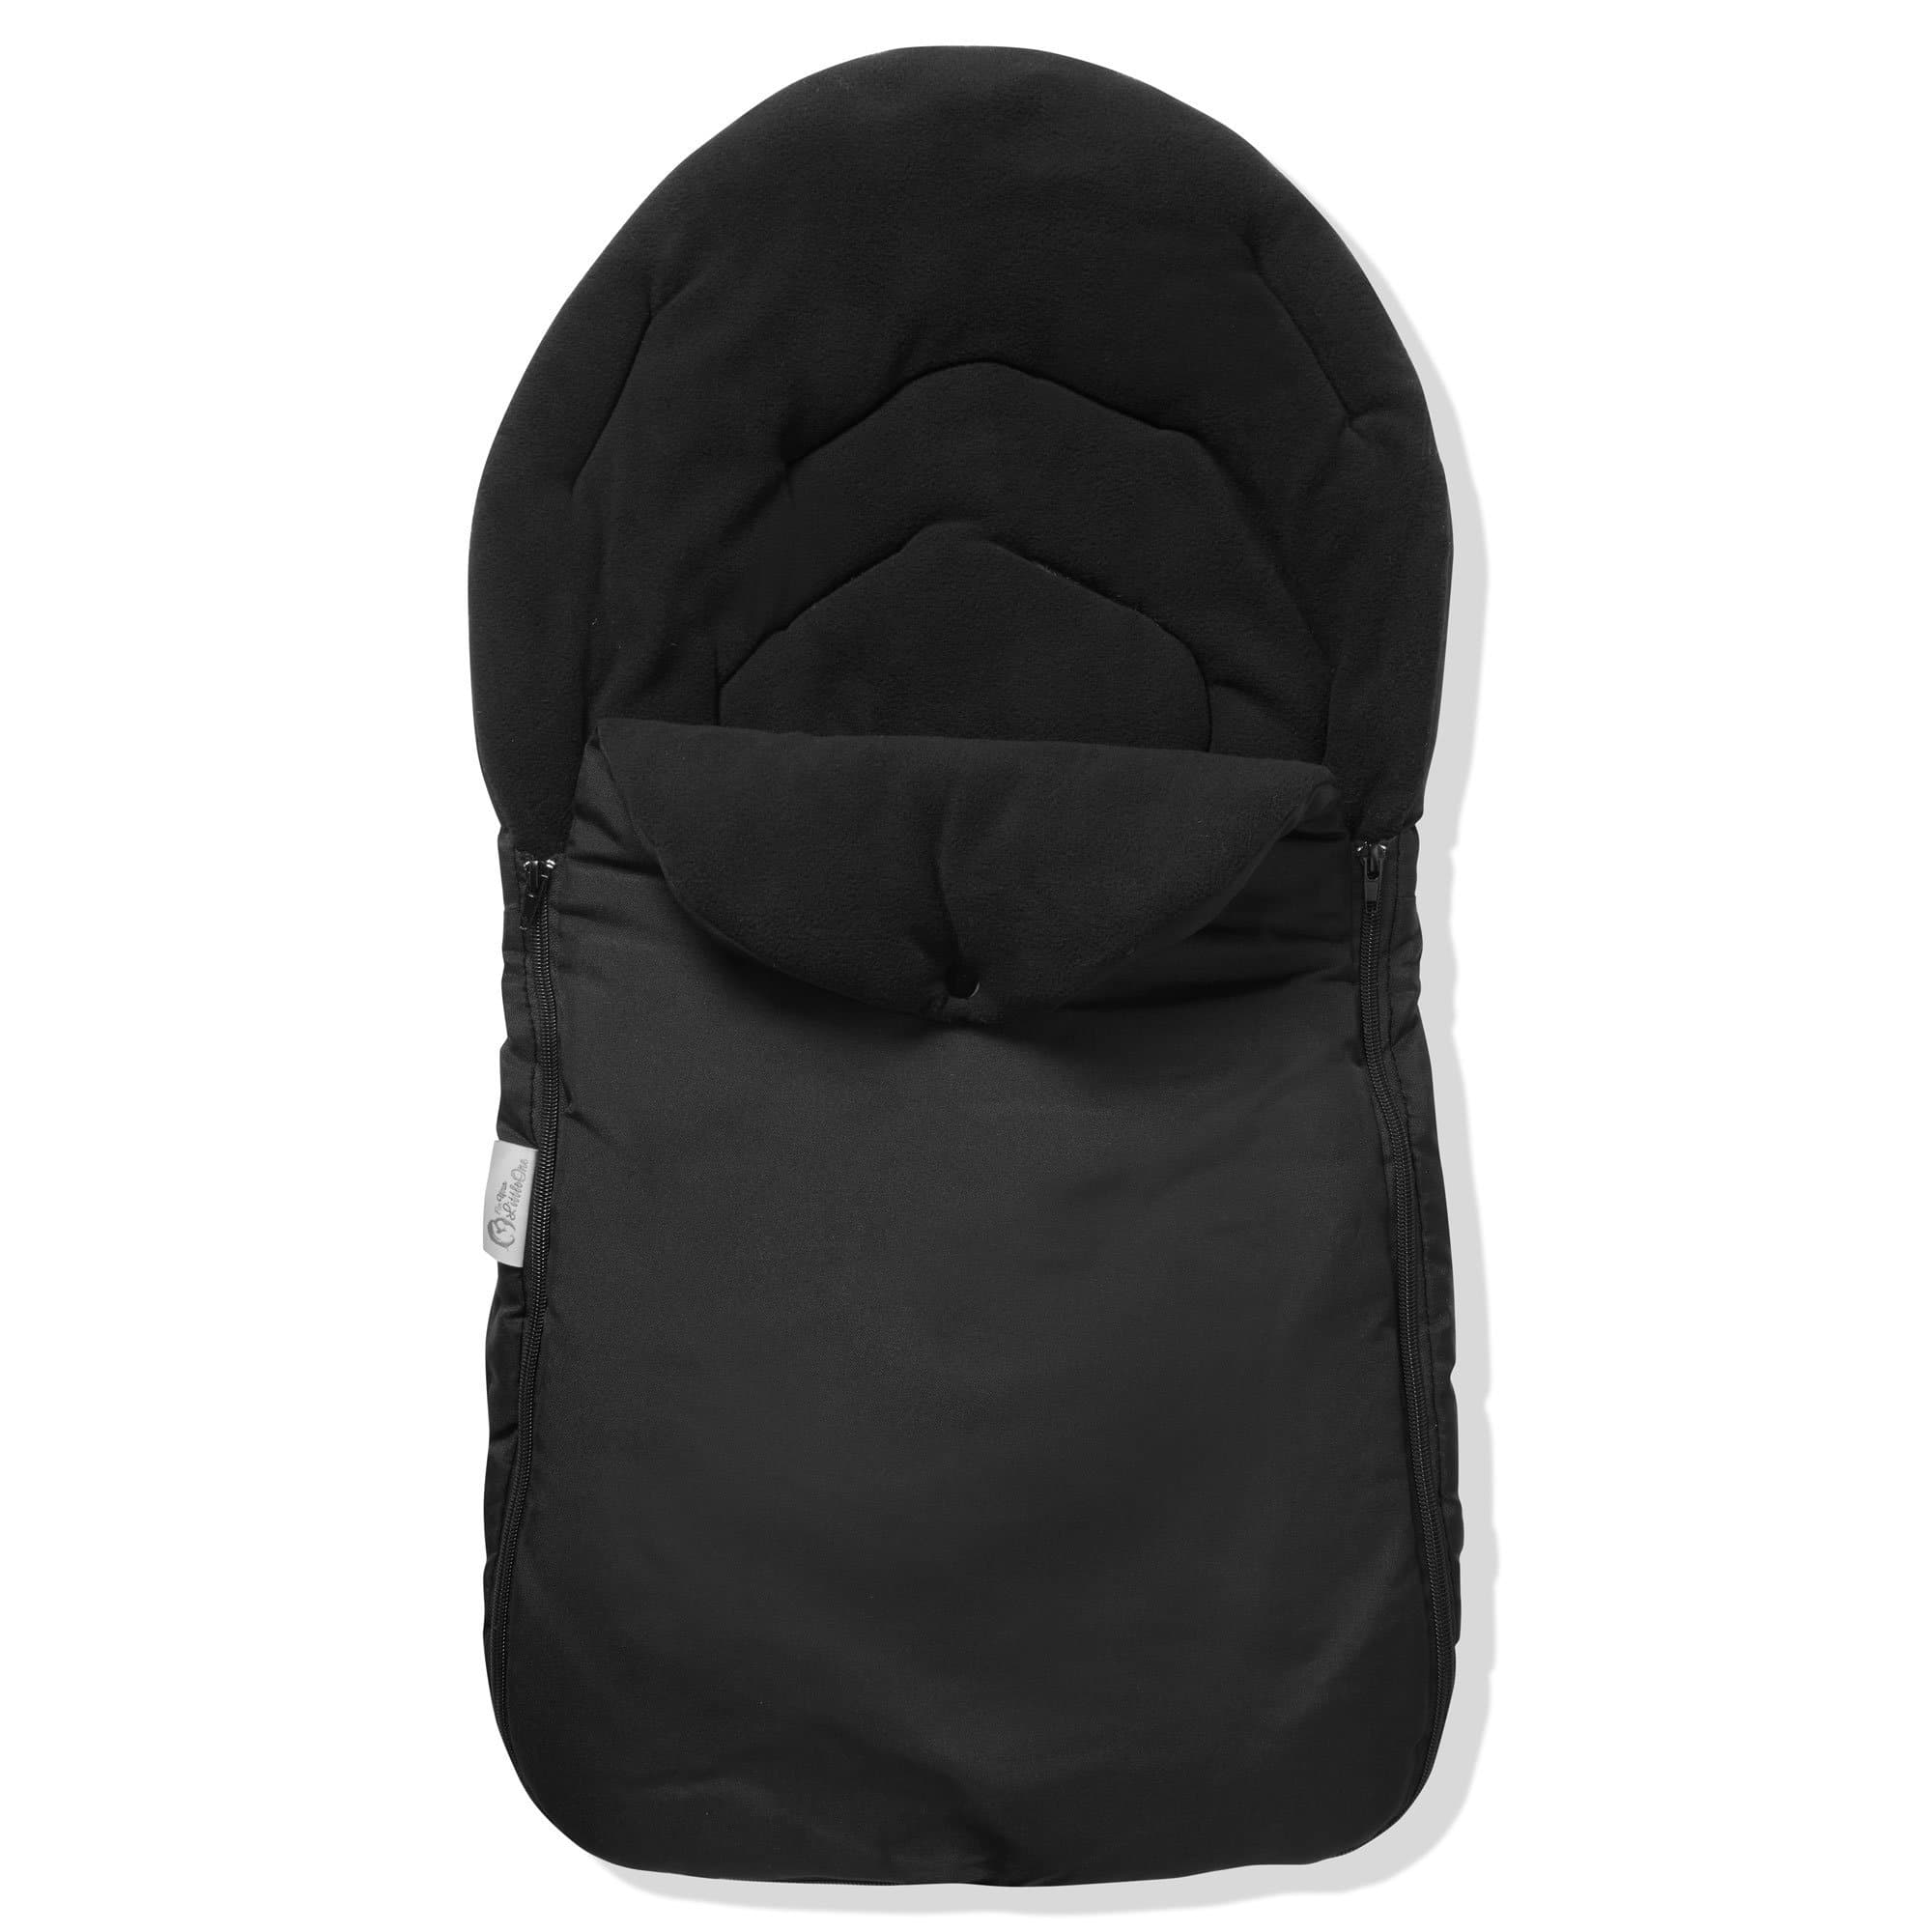 Car Seat Footmuff / Cosy Toes Compatible with Joolz - Black / Fits All Models | For Your Little One